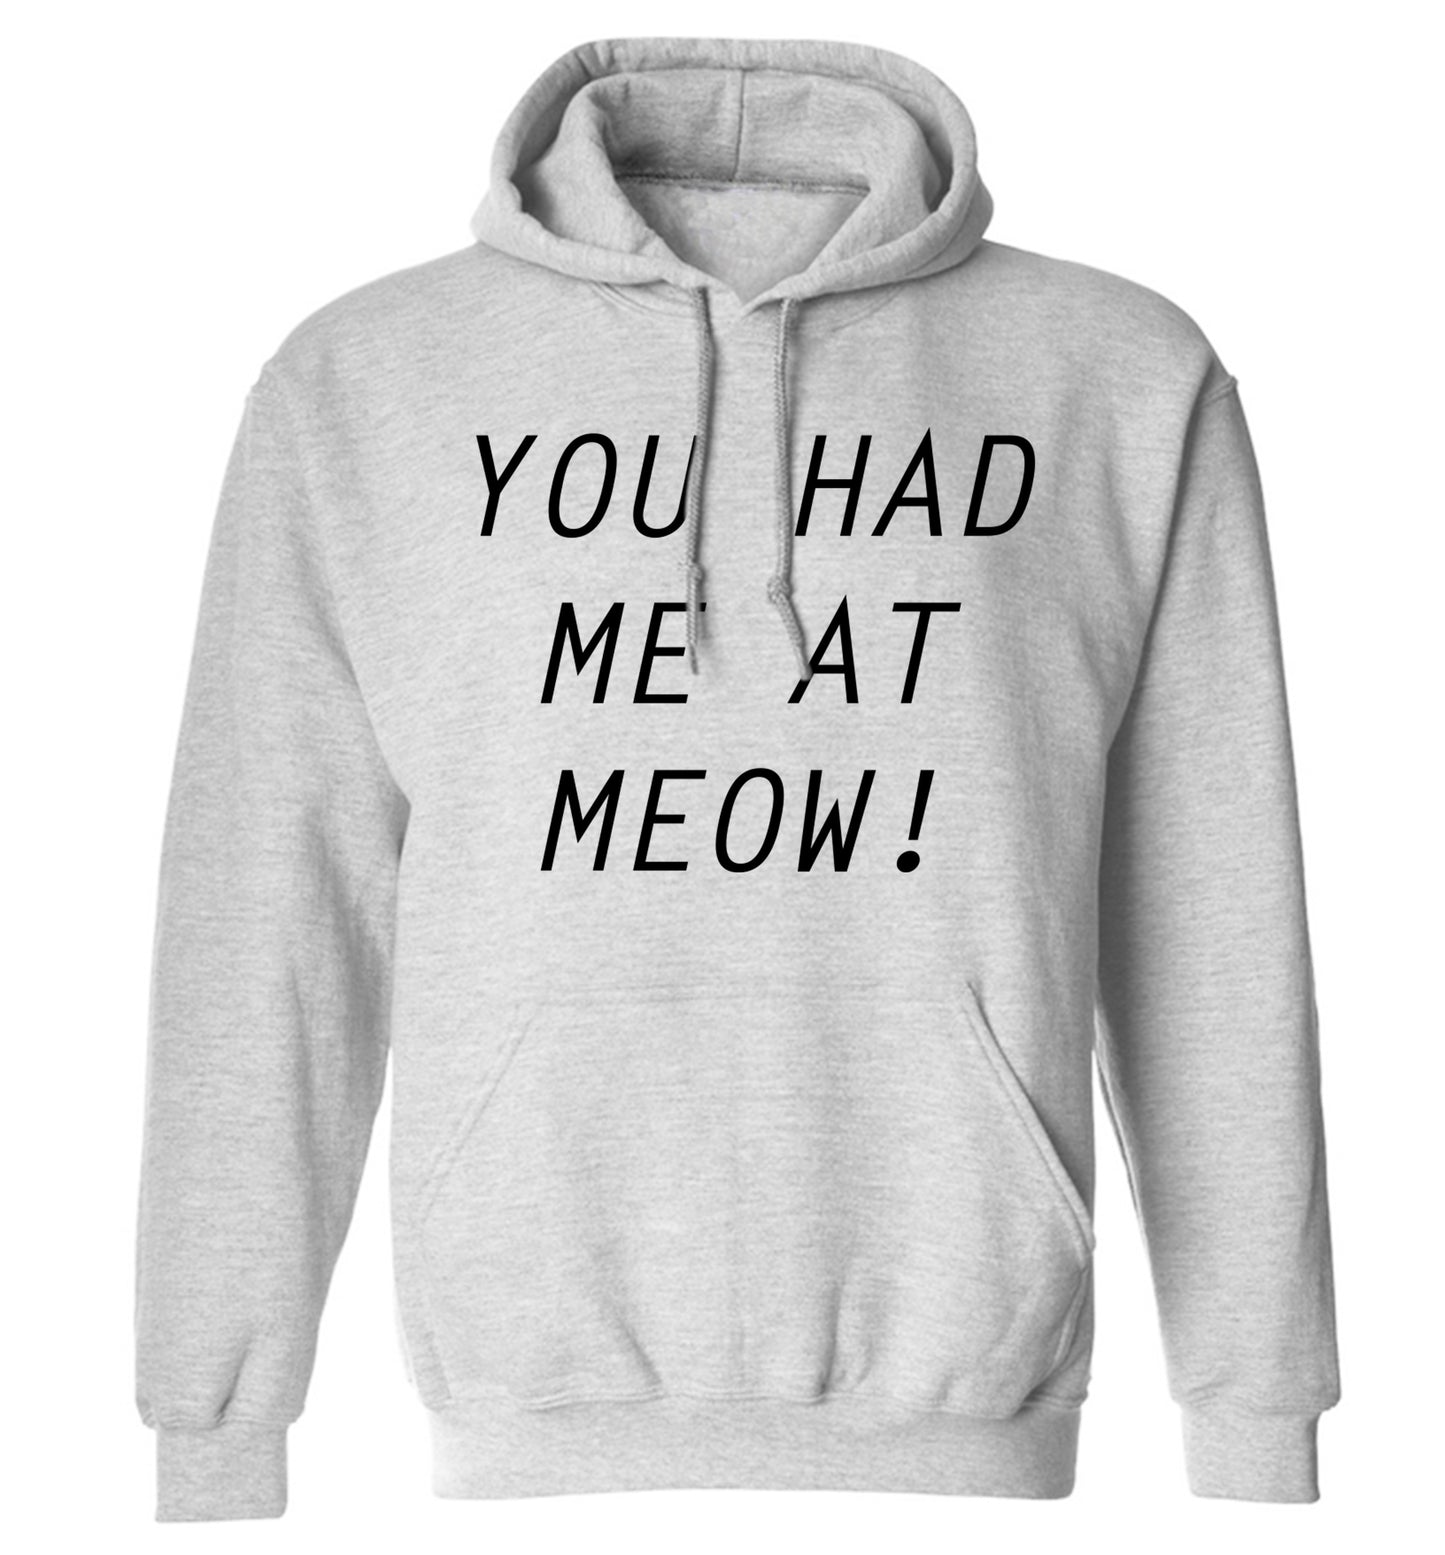 You had me at meow adults unisex grey hoodie 2XL